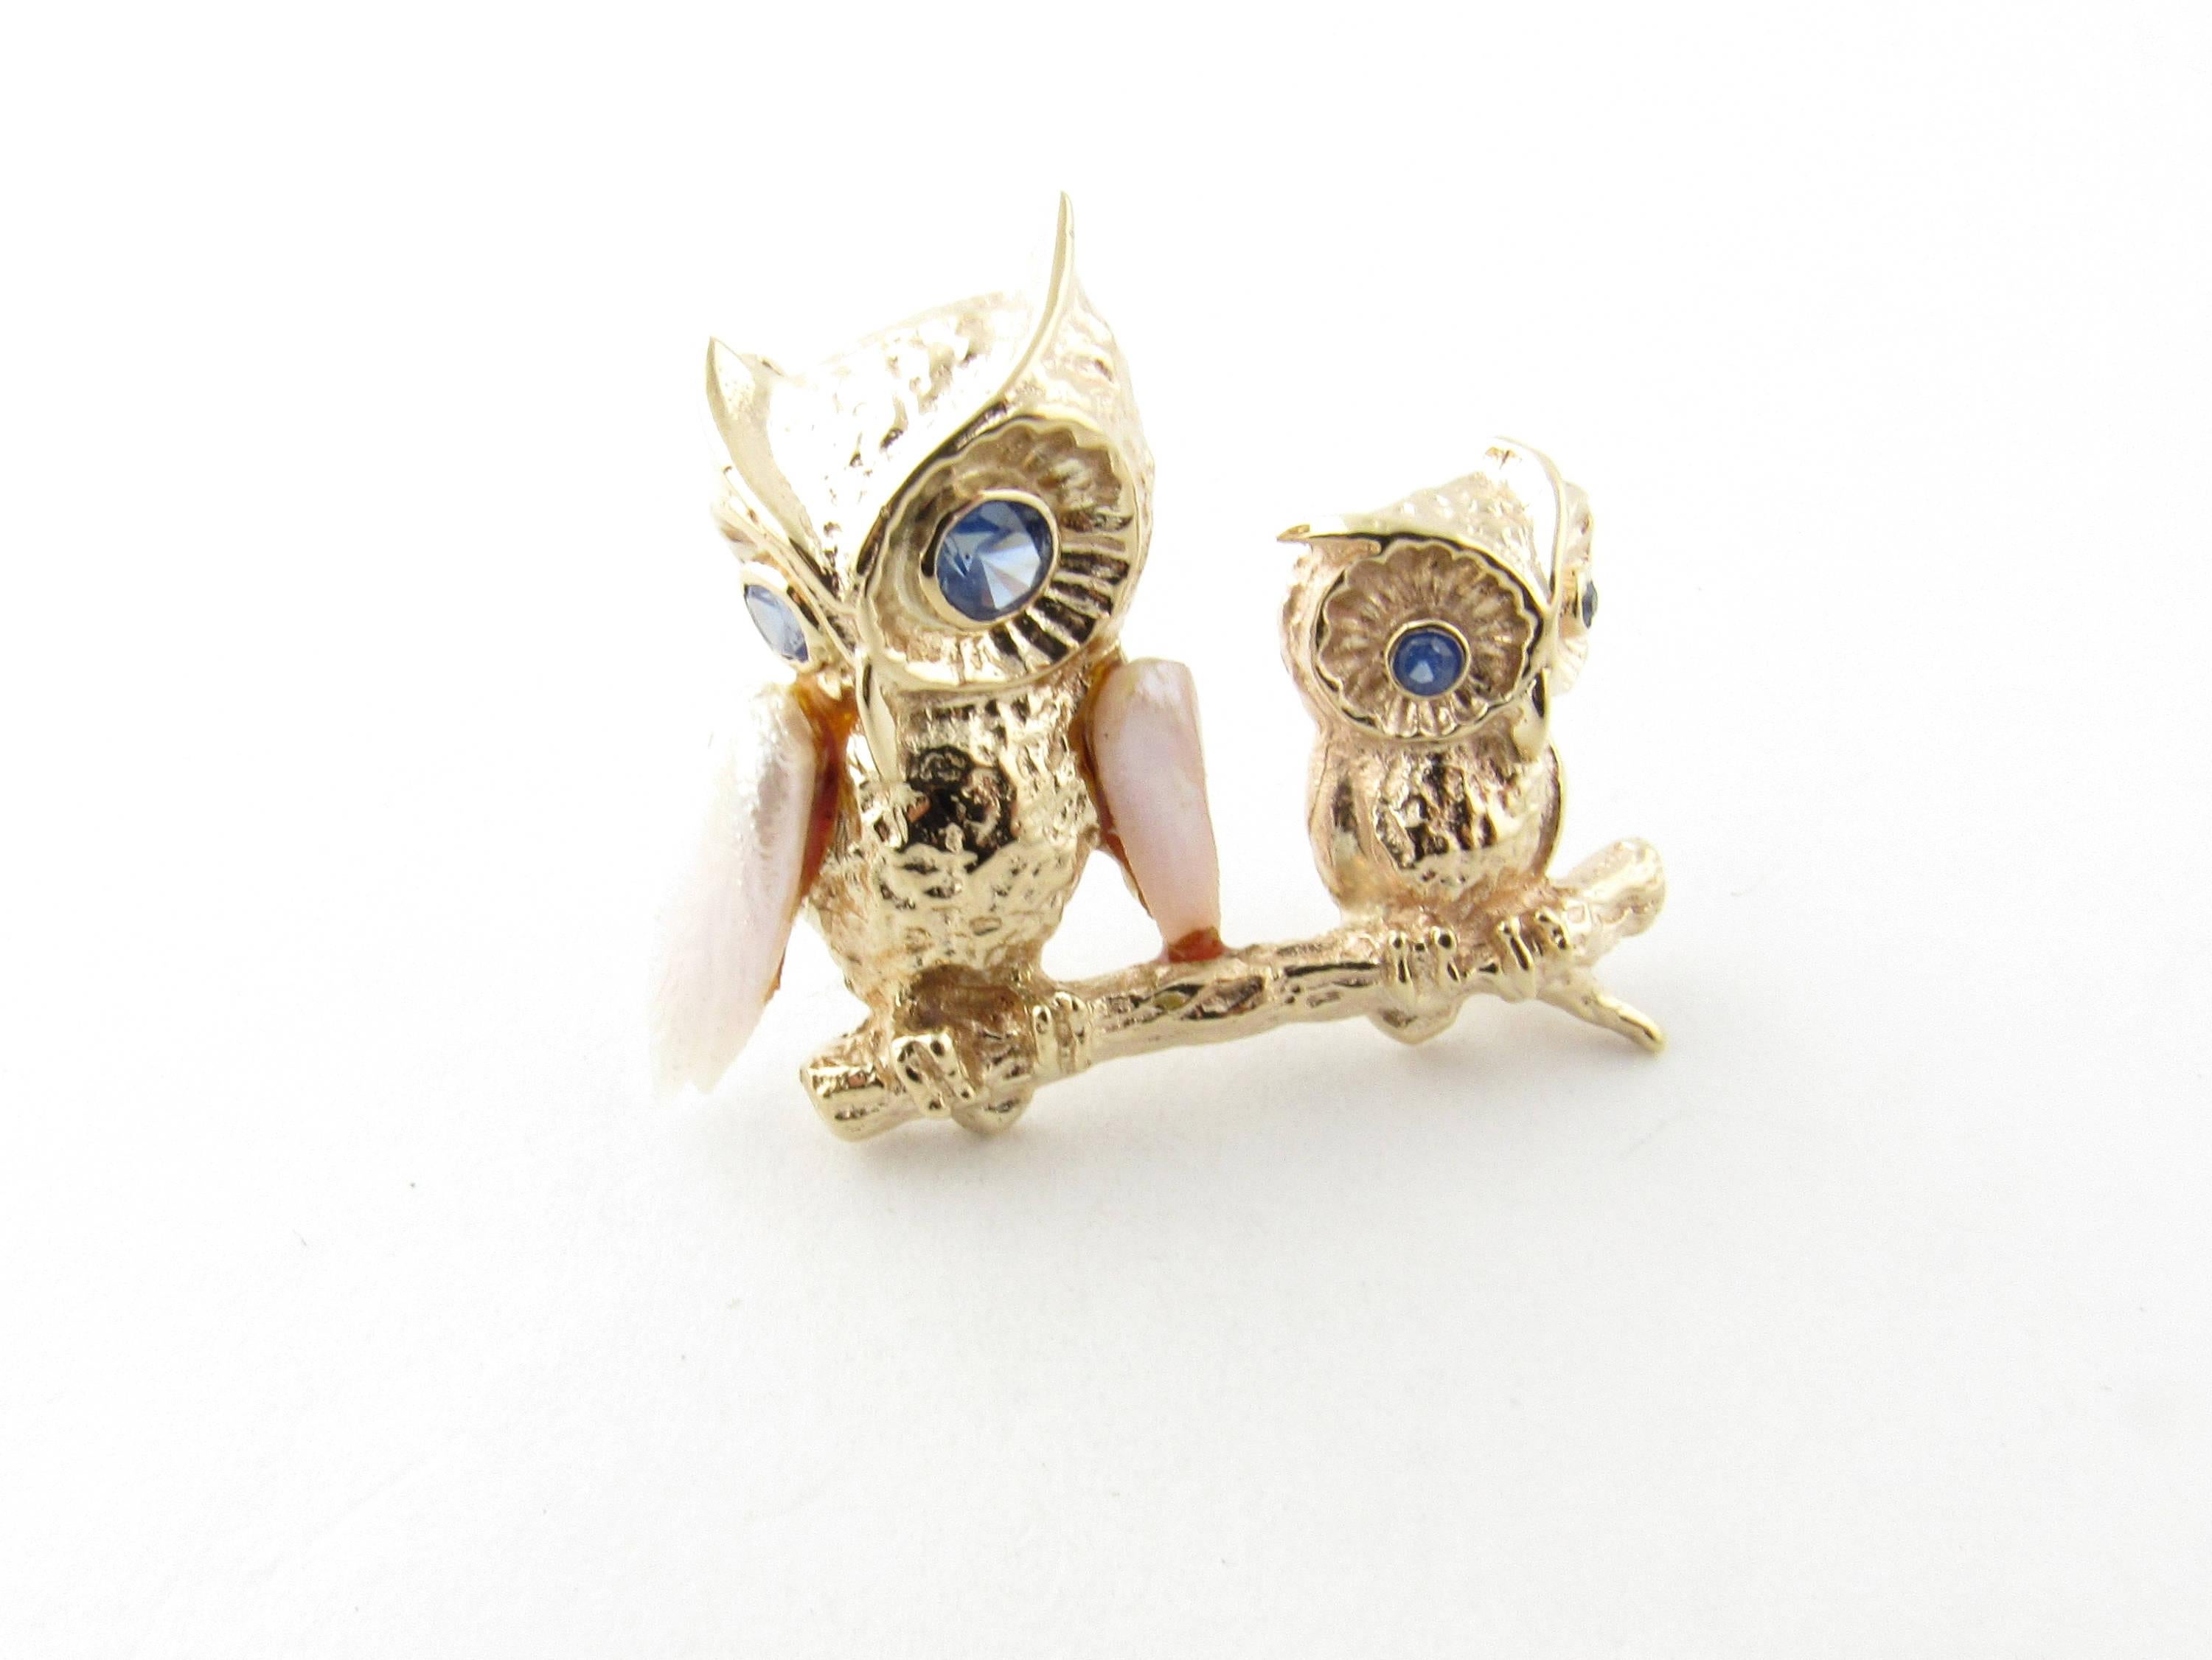 14 Karat Yellow Gold Pearl and Blue Topaz Owl Brooch or Pin 1